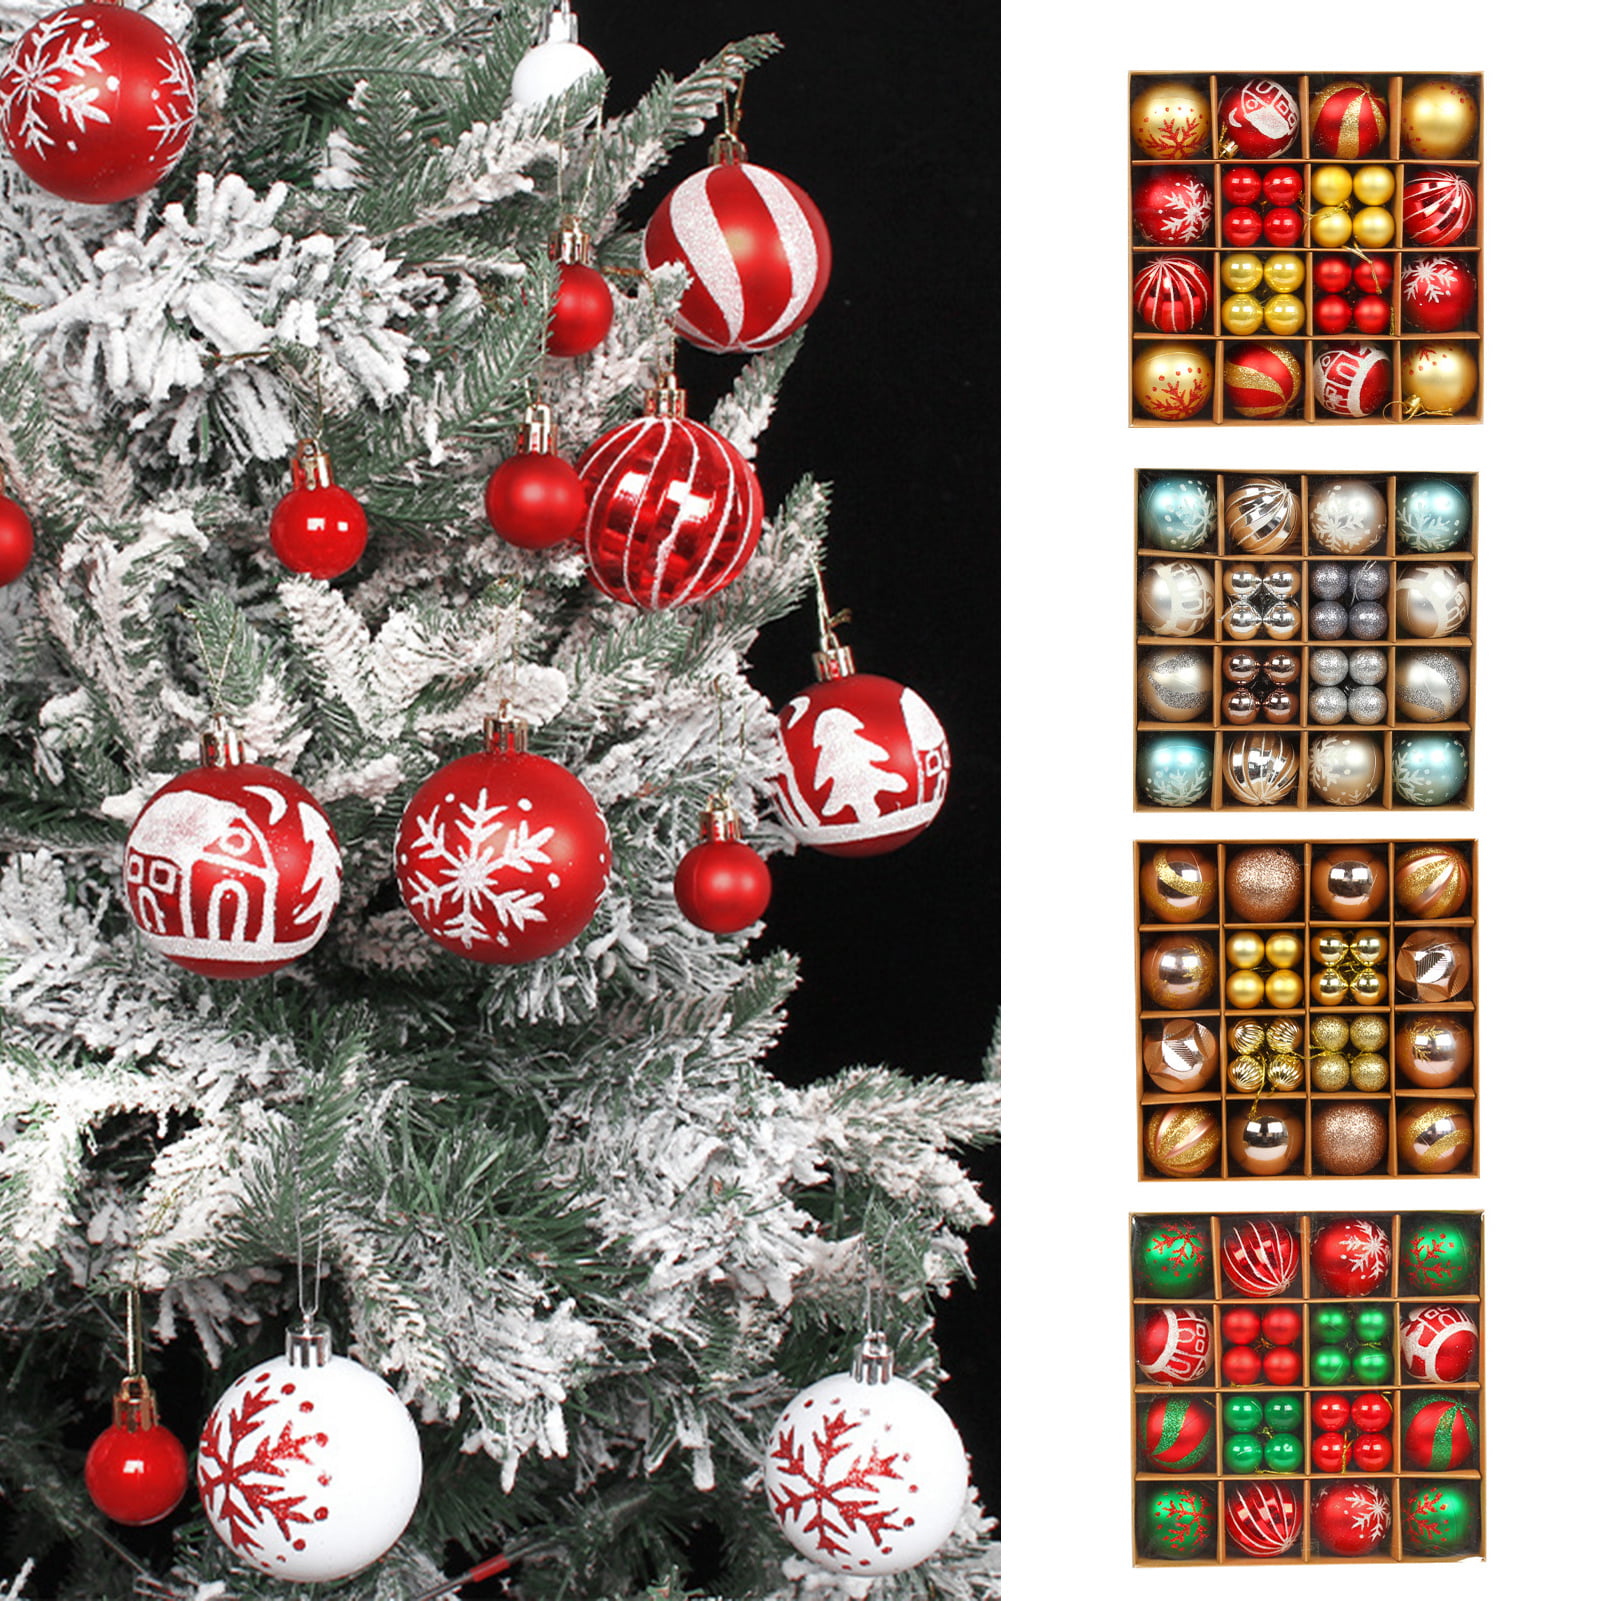 24pcs Clear Fillable Ornament Ball Capsules for Christmas Wedding Home Decor 6cm, Adult Unisex, Size: 30x20x10CM